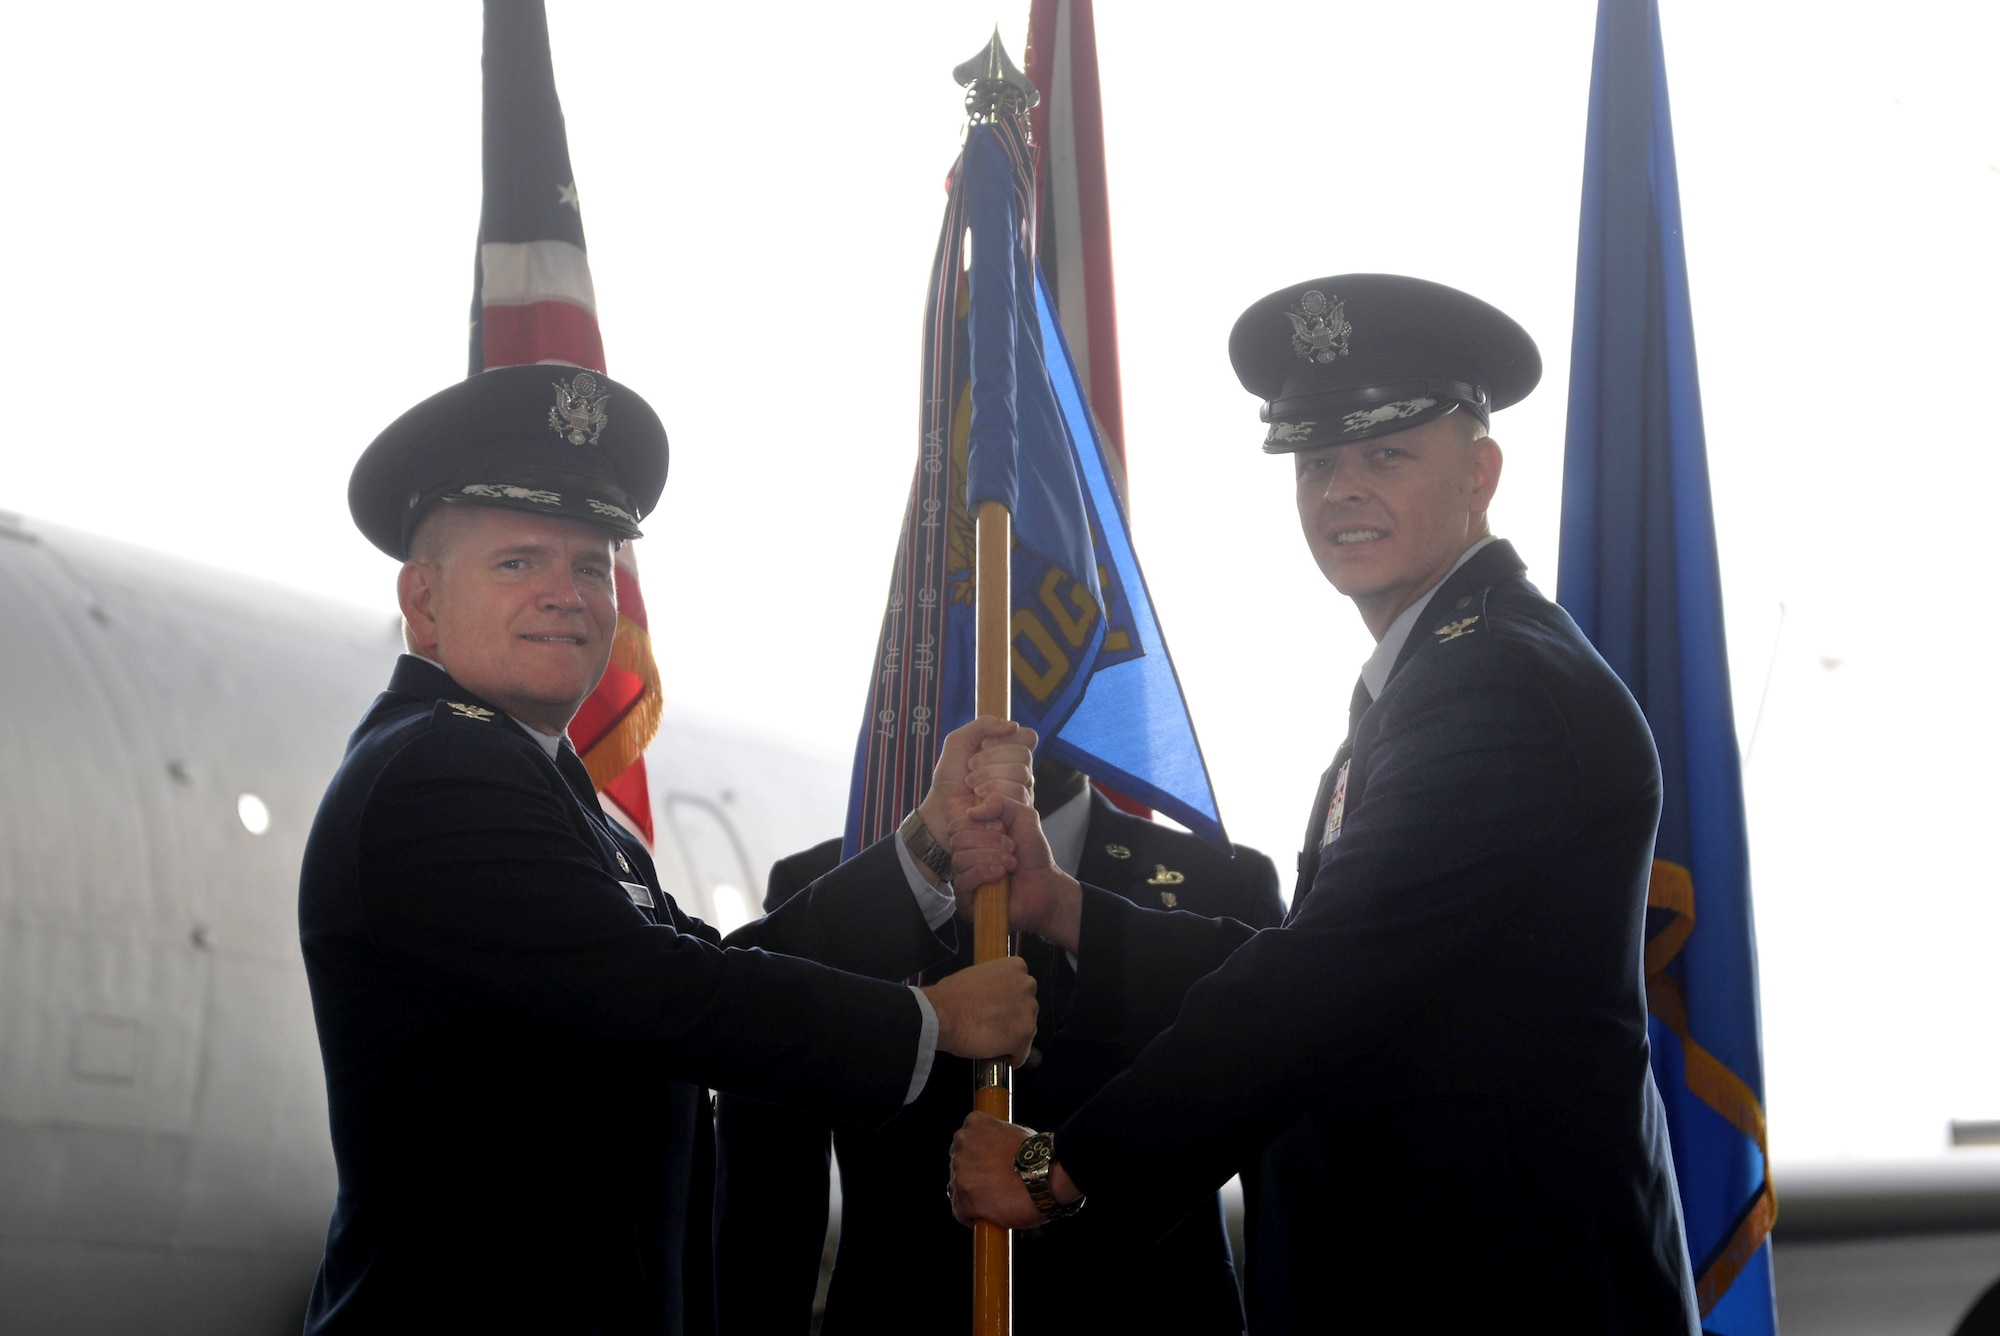 U.S. Air Force Col. Thomas Torkelson, left, 100th Air Refueling Wing commander, passes the 100th Operations Group guidon to U.S. Air Force Col. Derek Salmi, incoming 100th OG commander, during a change of command ceremony June 28, 2016, on RAF Mildenhall, England. The 100th OG is responsible for the planning, scheduling and execution of all U.S. Air Forces in Europe air refueling operations, and accountable for mission readiness, mobilization, employment, training and standardization of 15 KC-135R Stratotanker aircraft and 245 permanently assigned aircrew and support personnel. (U.S. Air Force photo by Staff Sgt. Kate Thornton/Released)